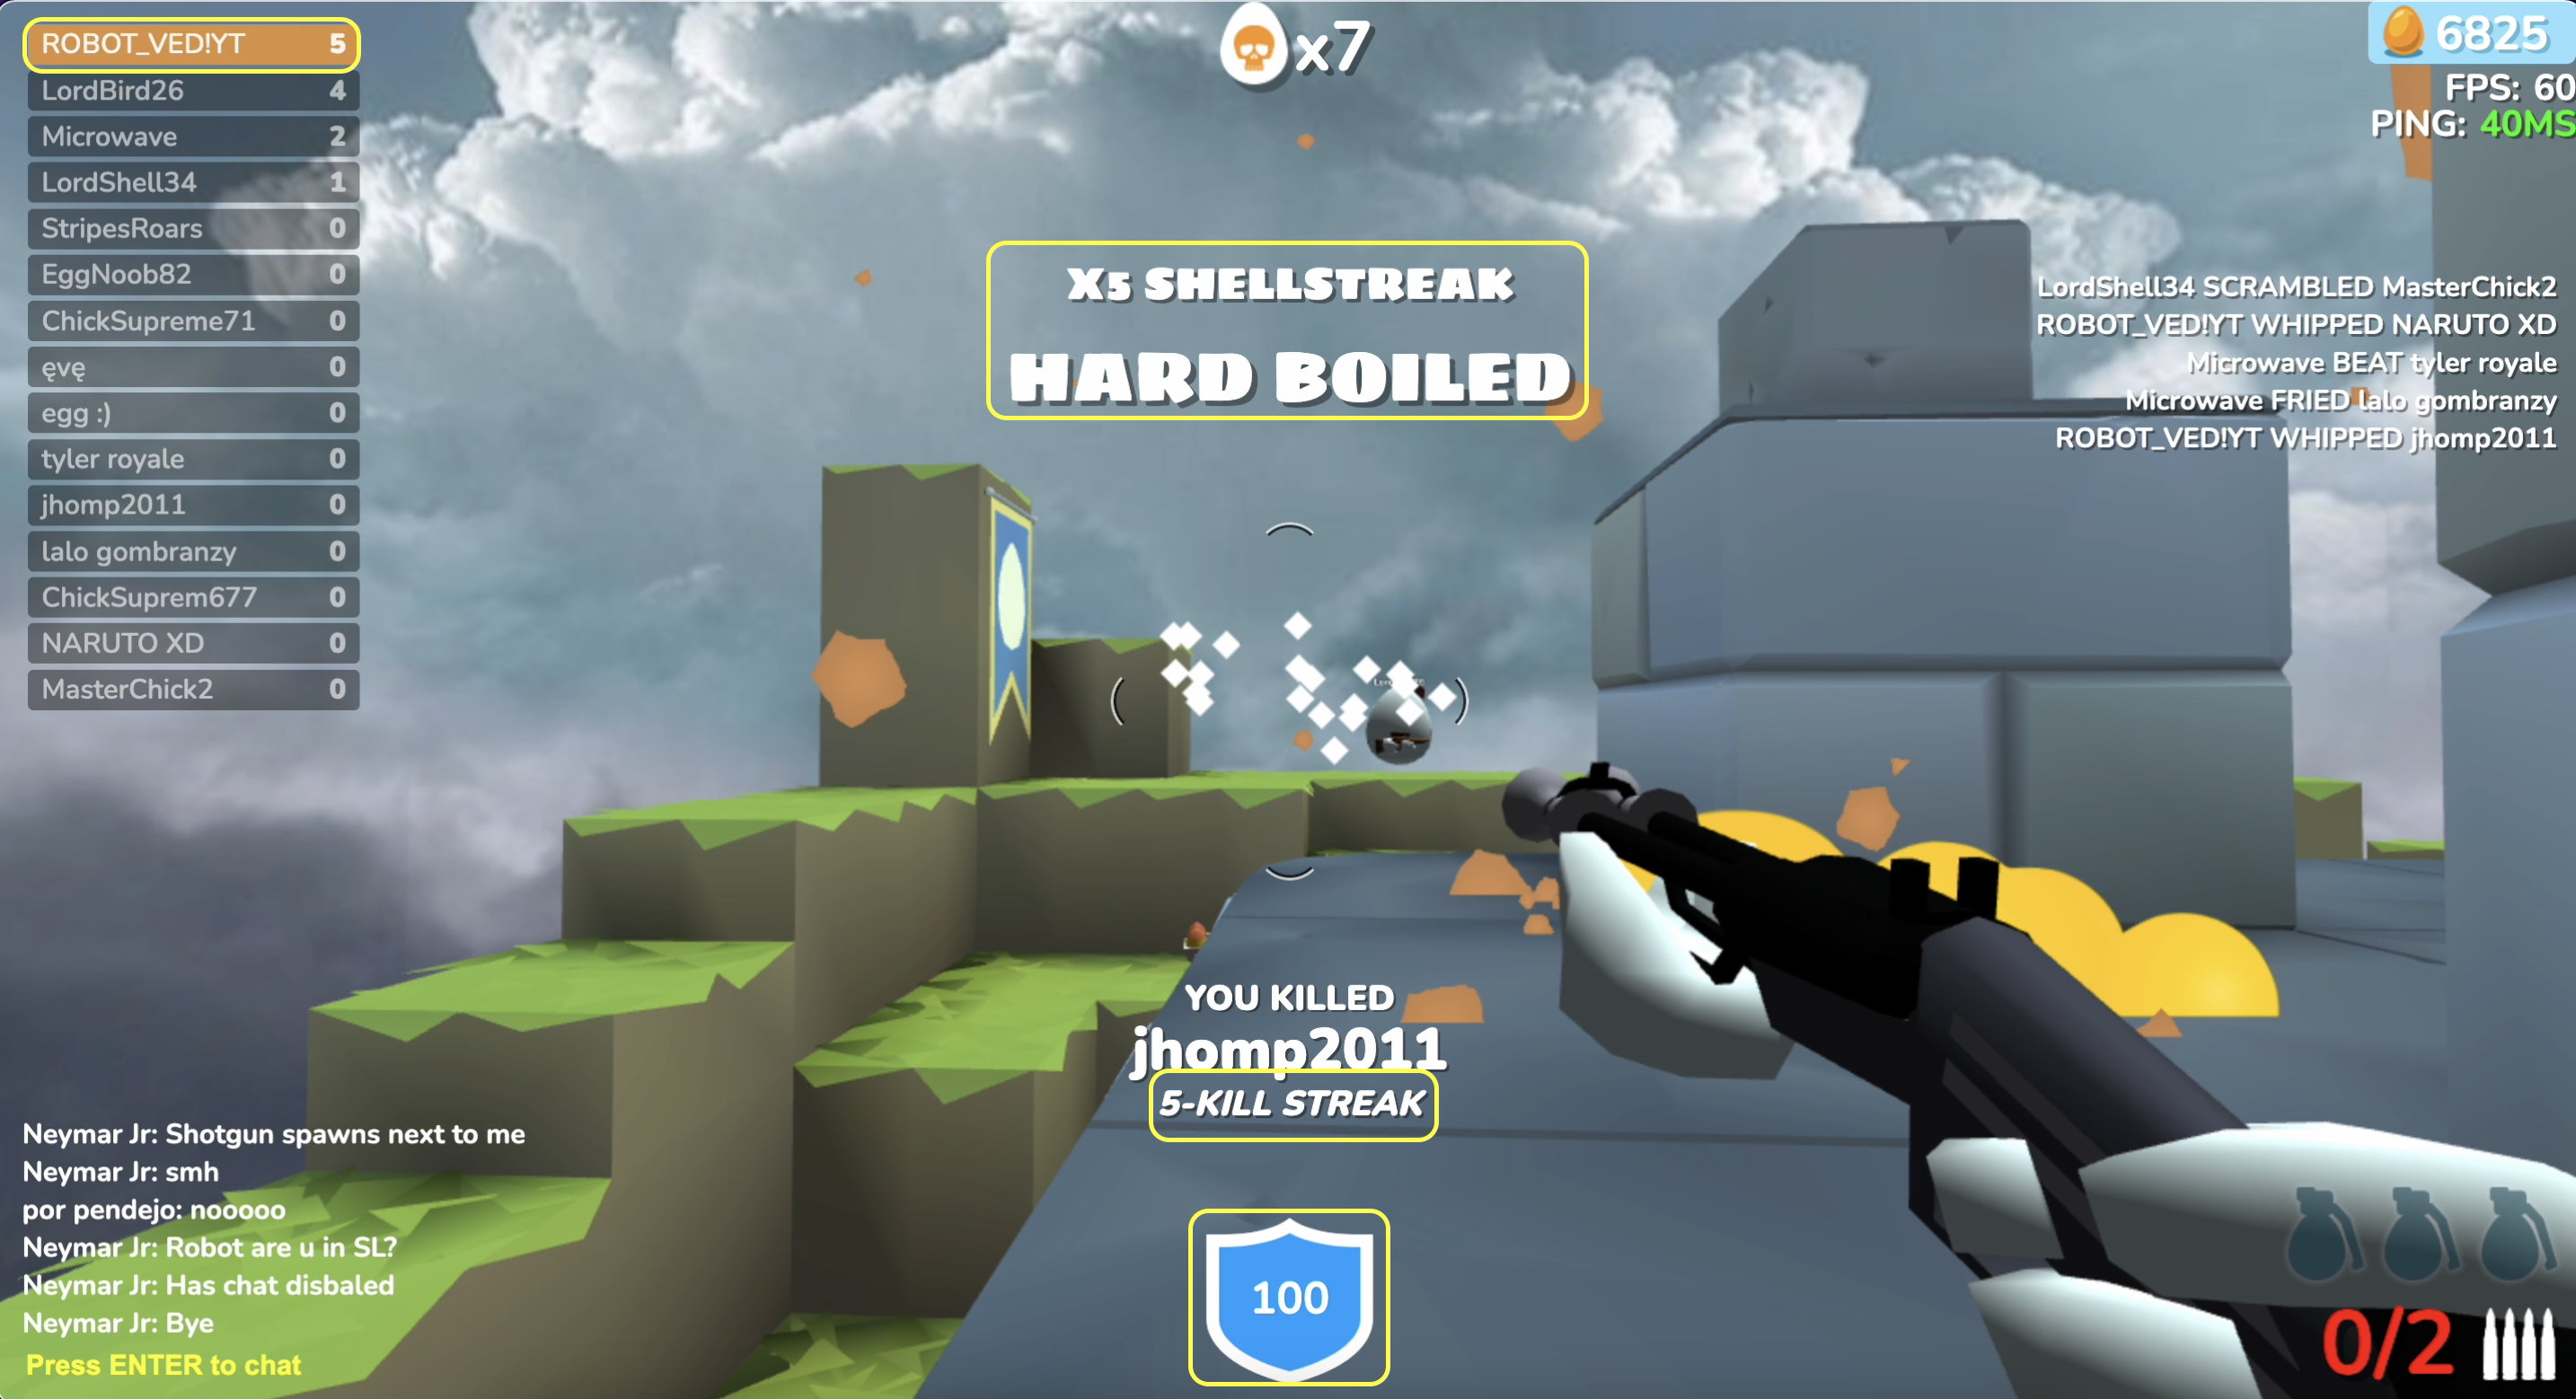 Shell Shockers — Play for free at